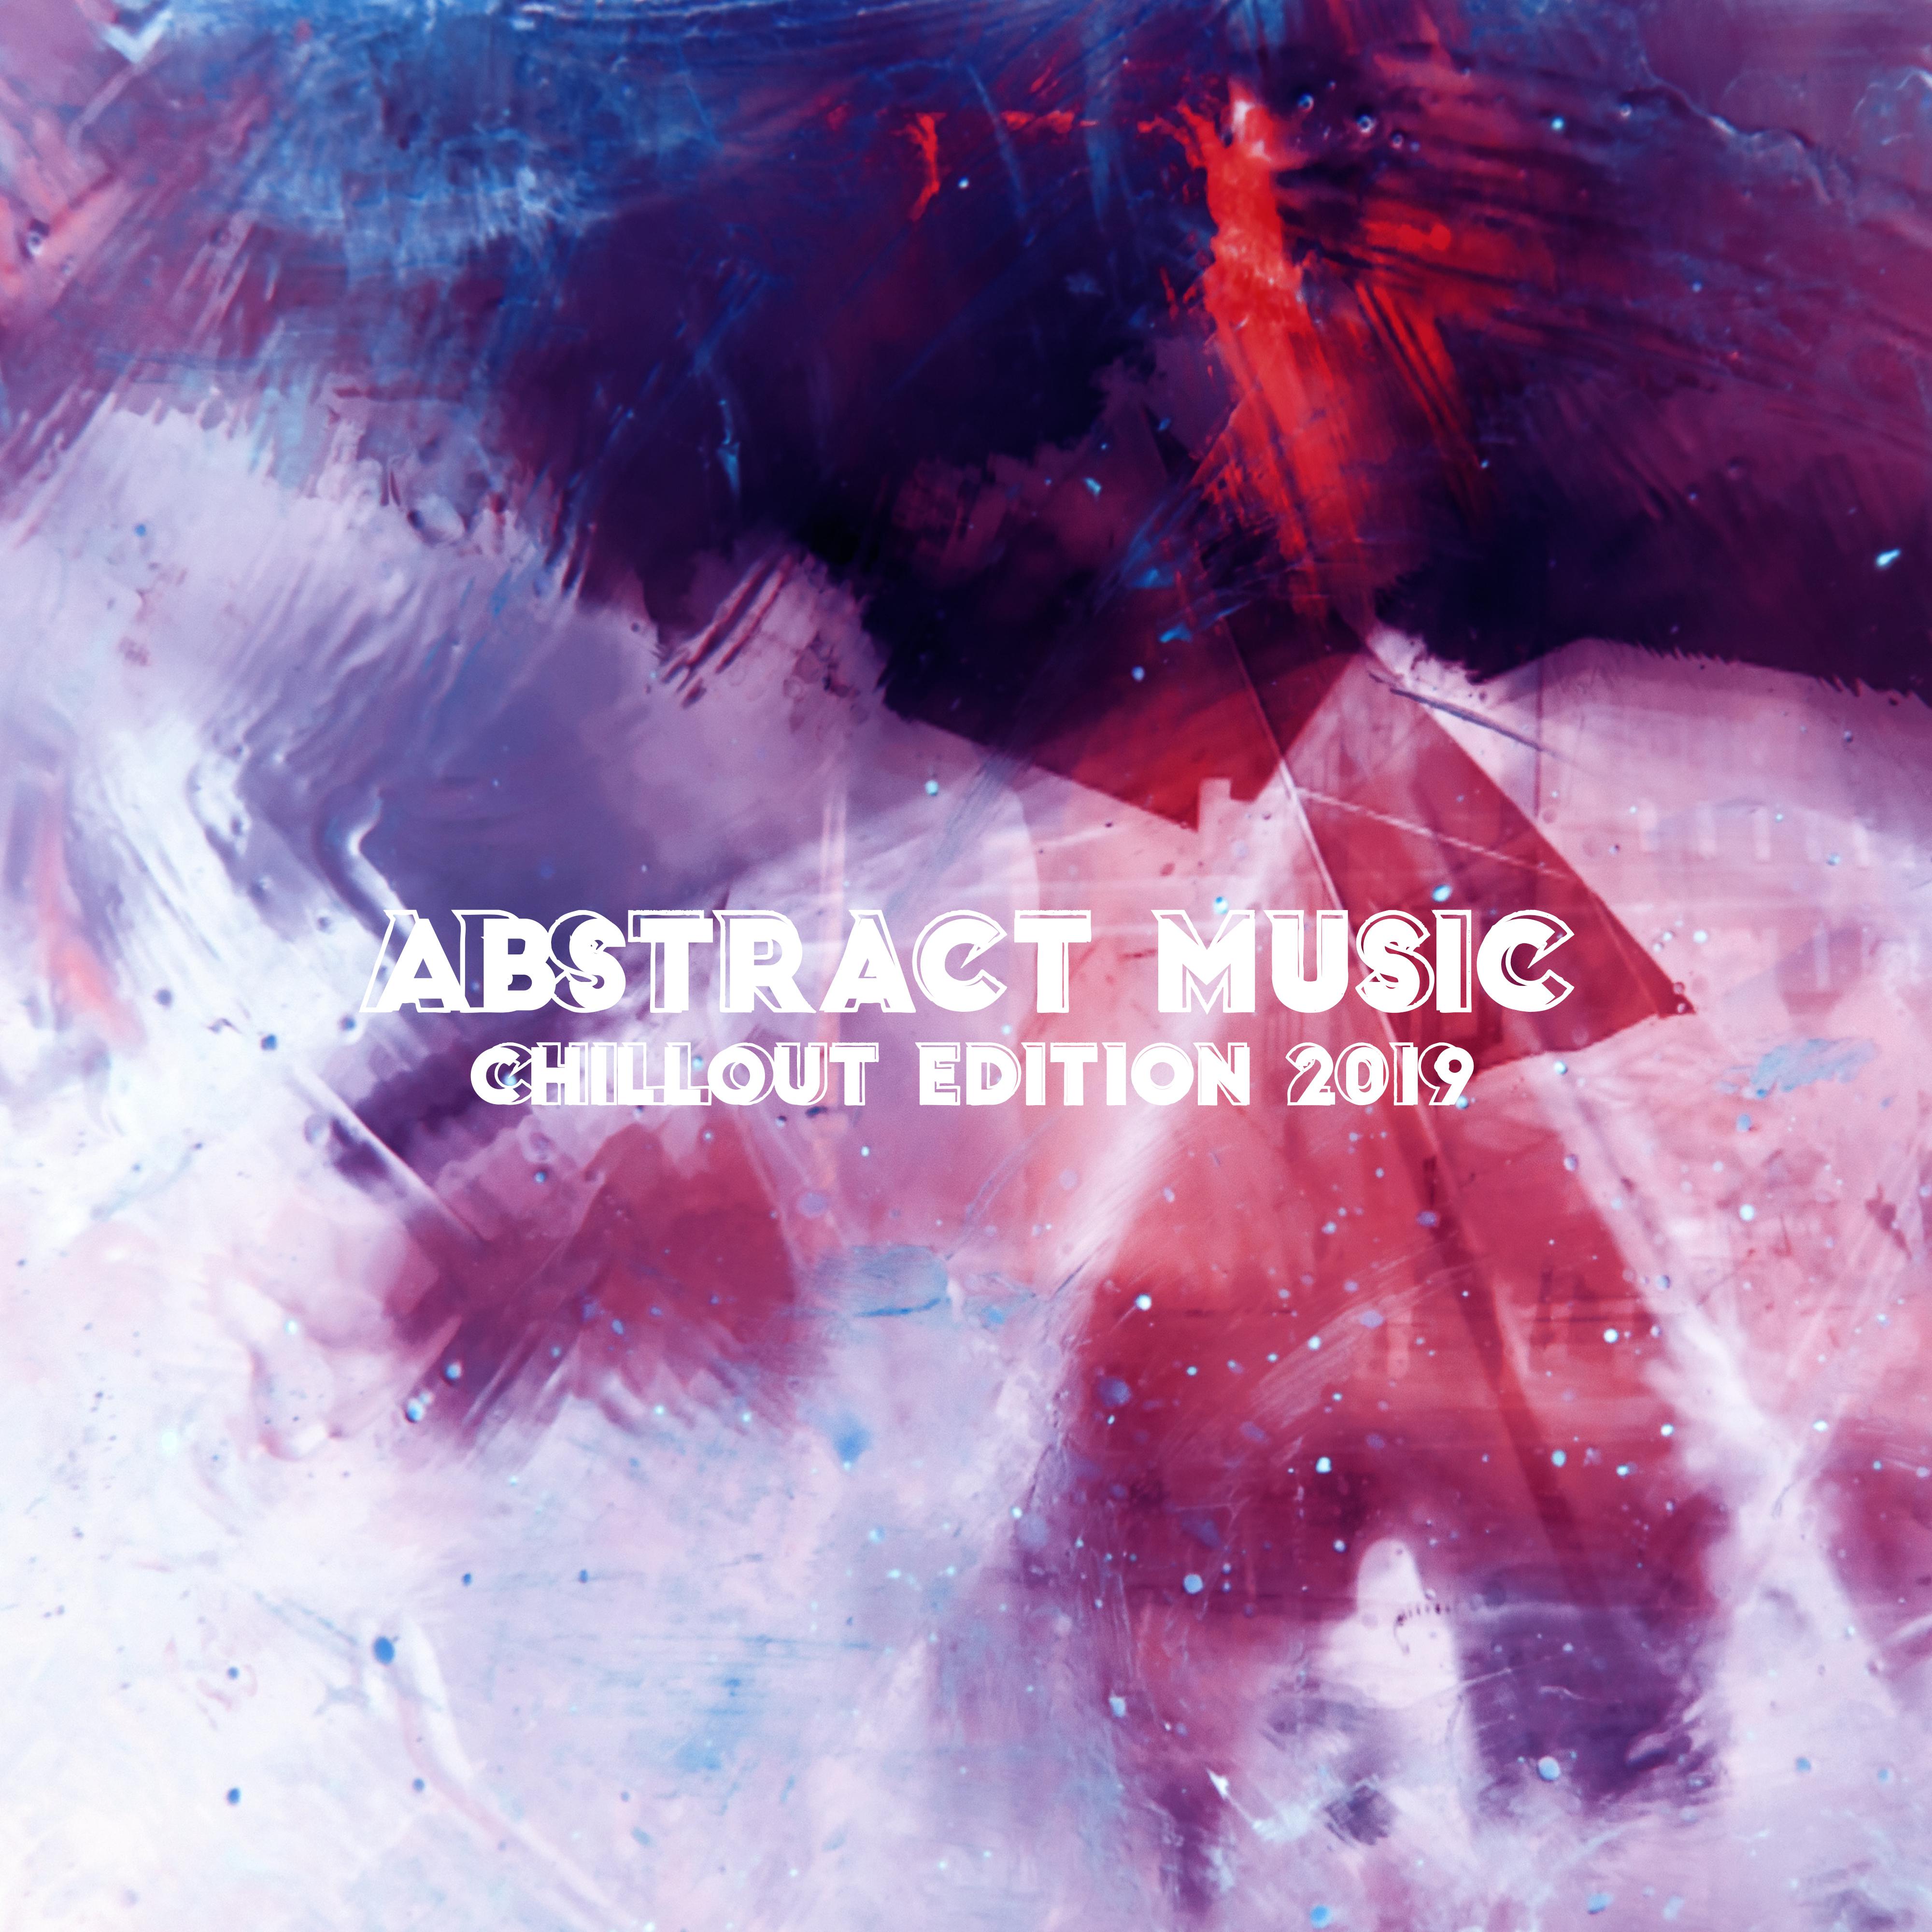 Abstract Music: Chillout Edition 2019